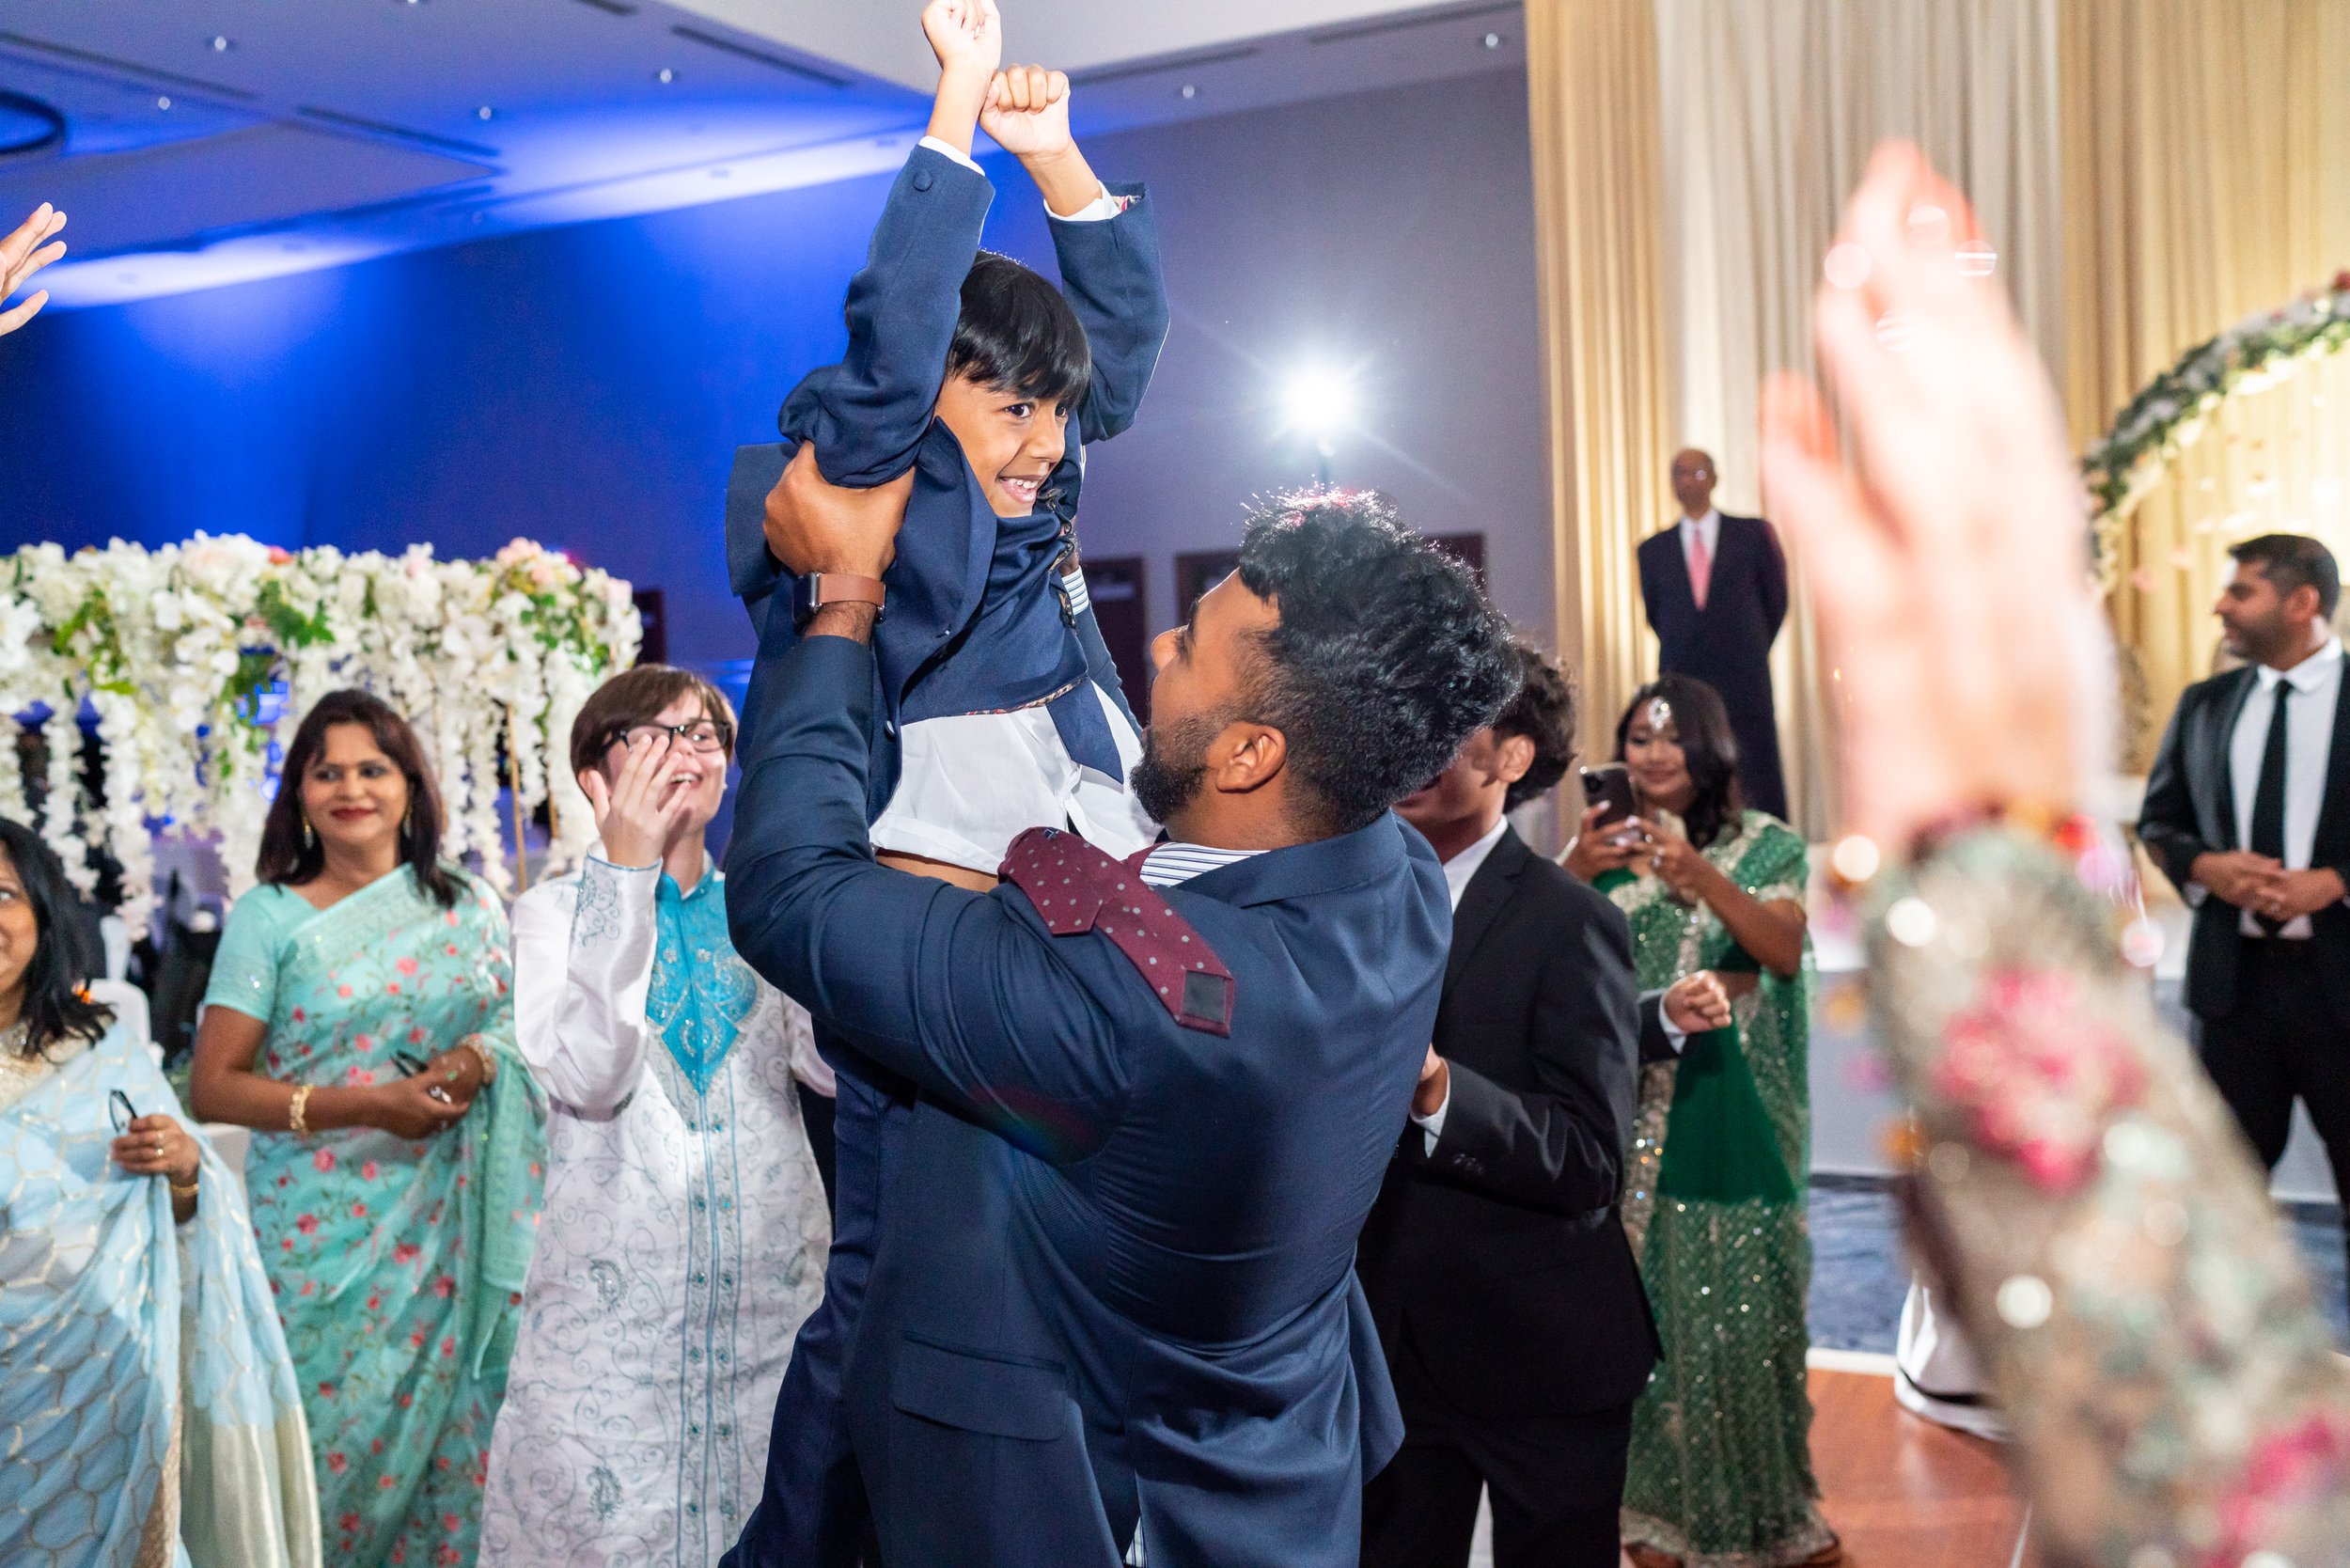 Wedding guest lifting his son on the dance floor at indian wedding